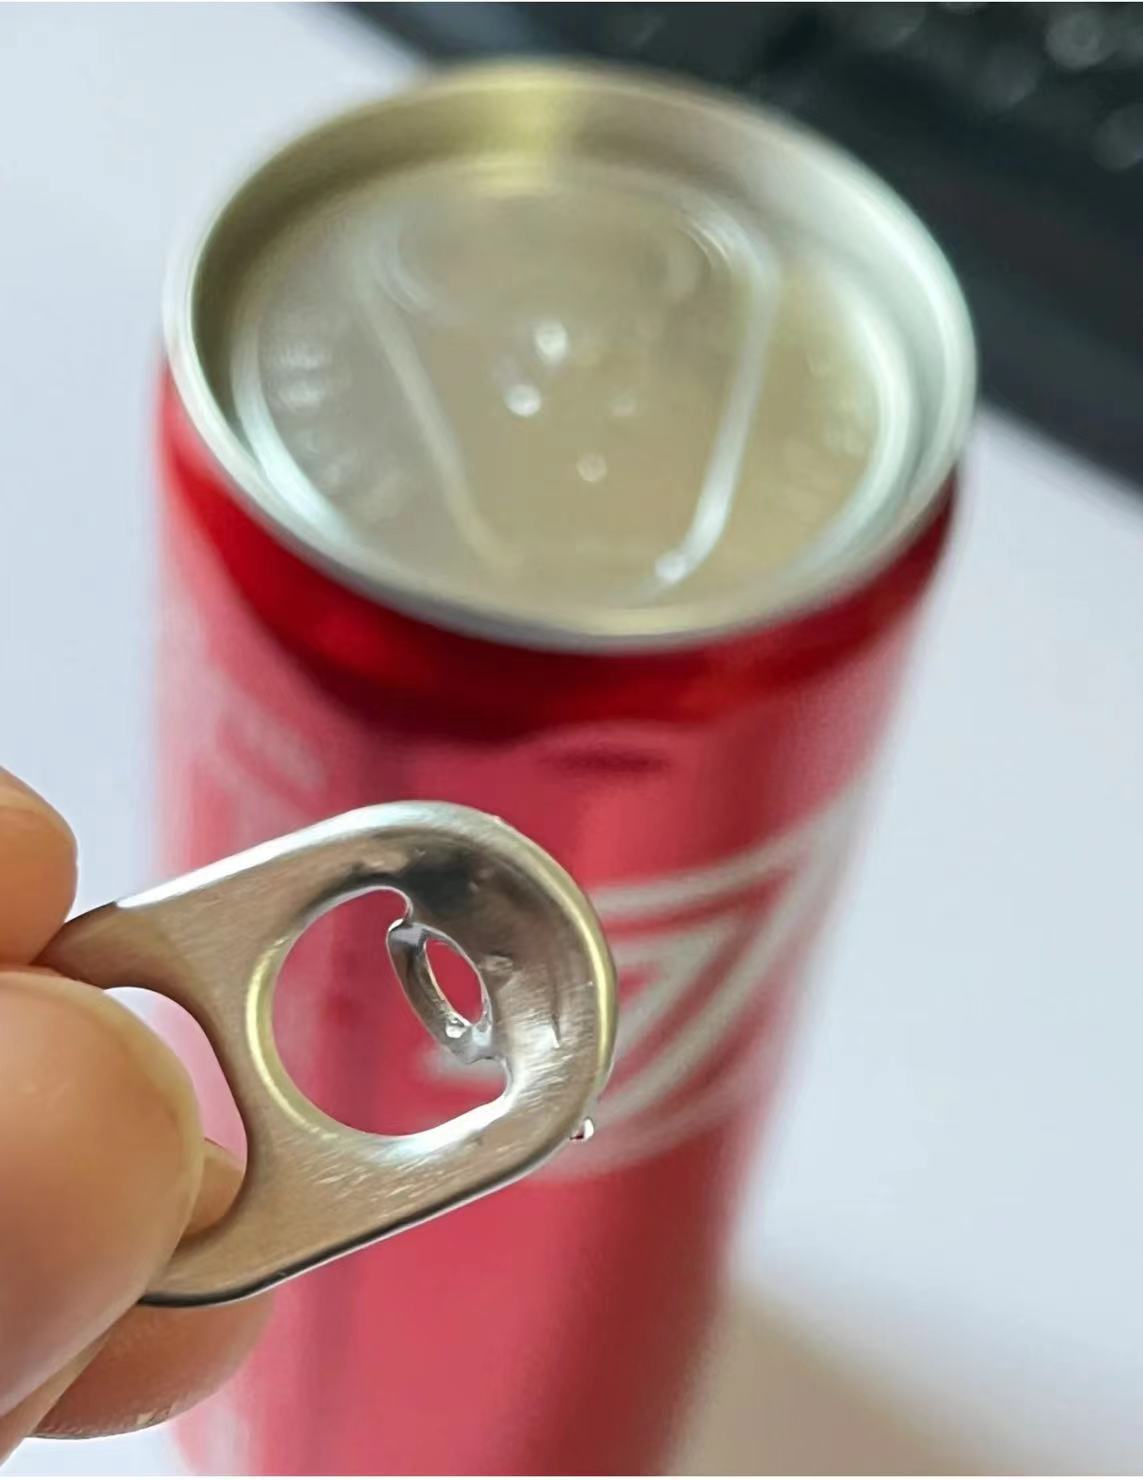 "What to Do When the Pop Tab Breaks on Your Soda Can? Handy Tips and Tricks!"